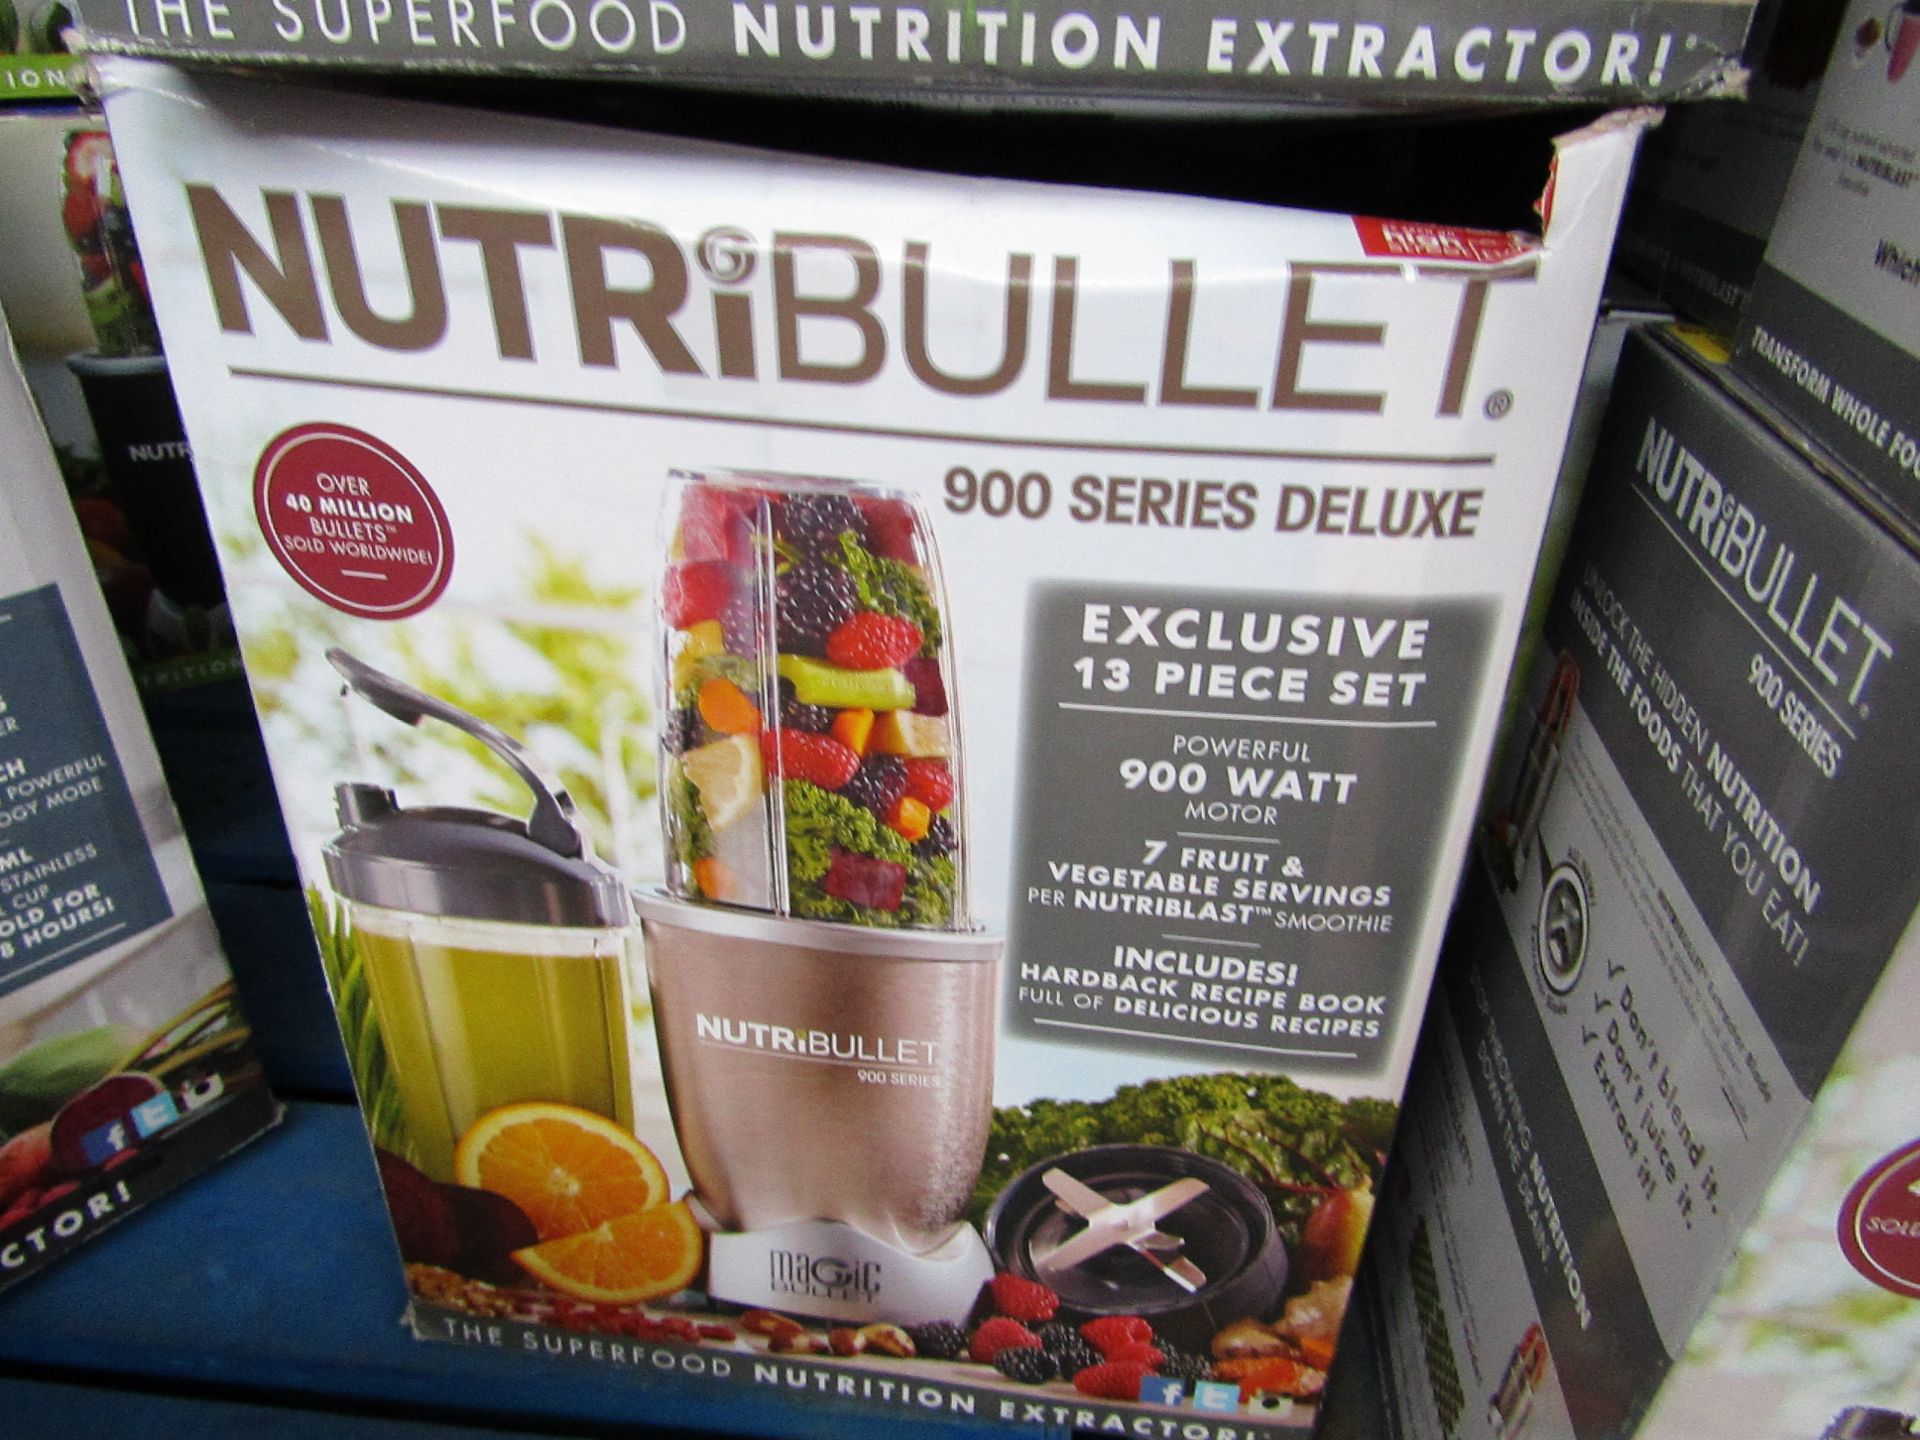 | 1x | NUTRIBULLET 900 SERIES | UNCHECKED AND BOXED | NO ONLINE RE-SALE | SKU C5060191463409 |